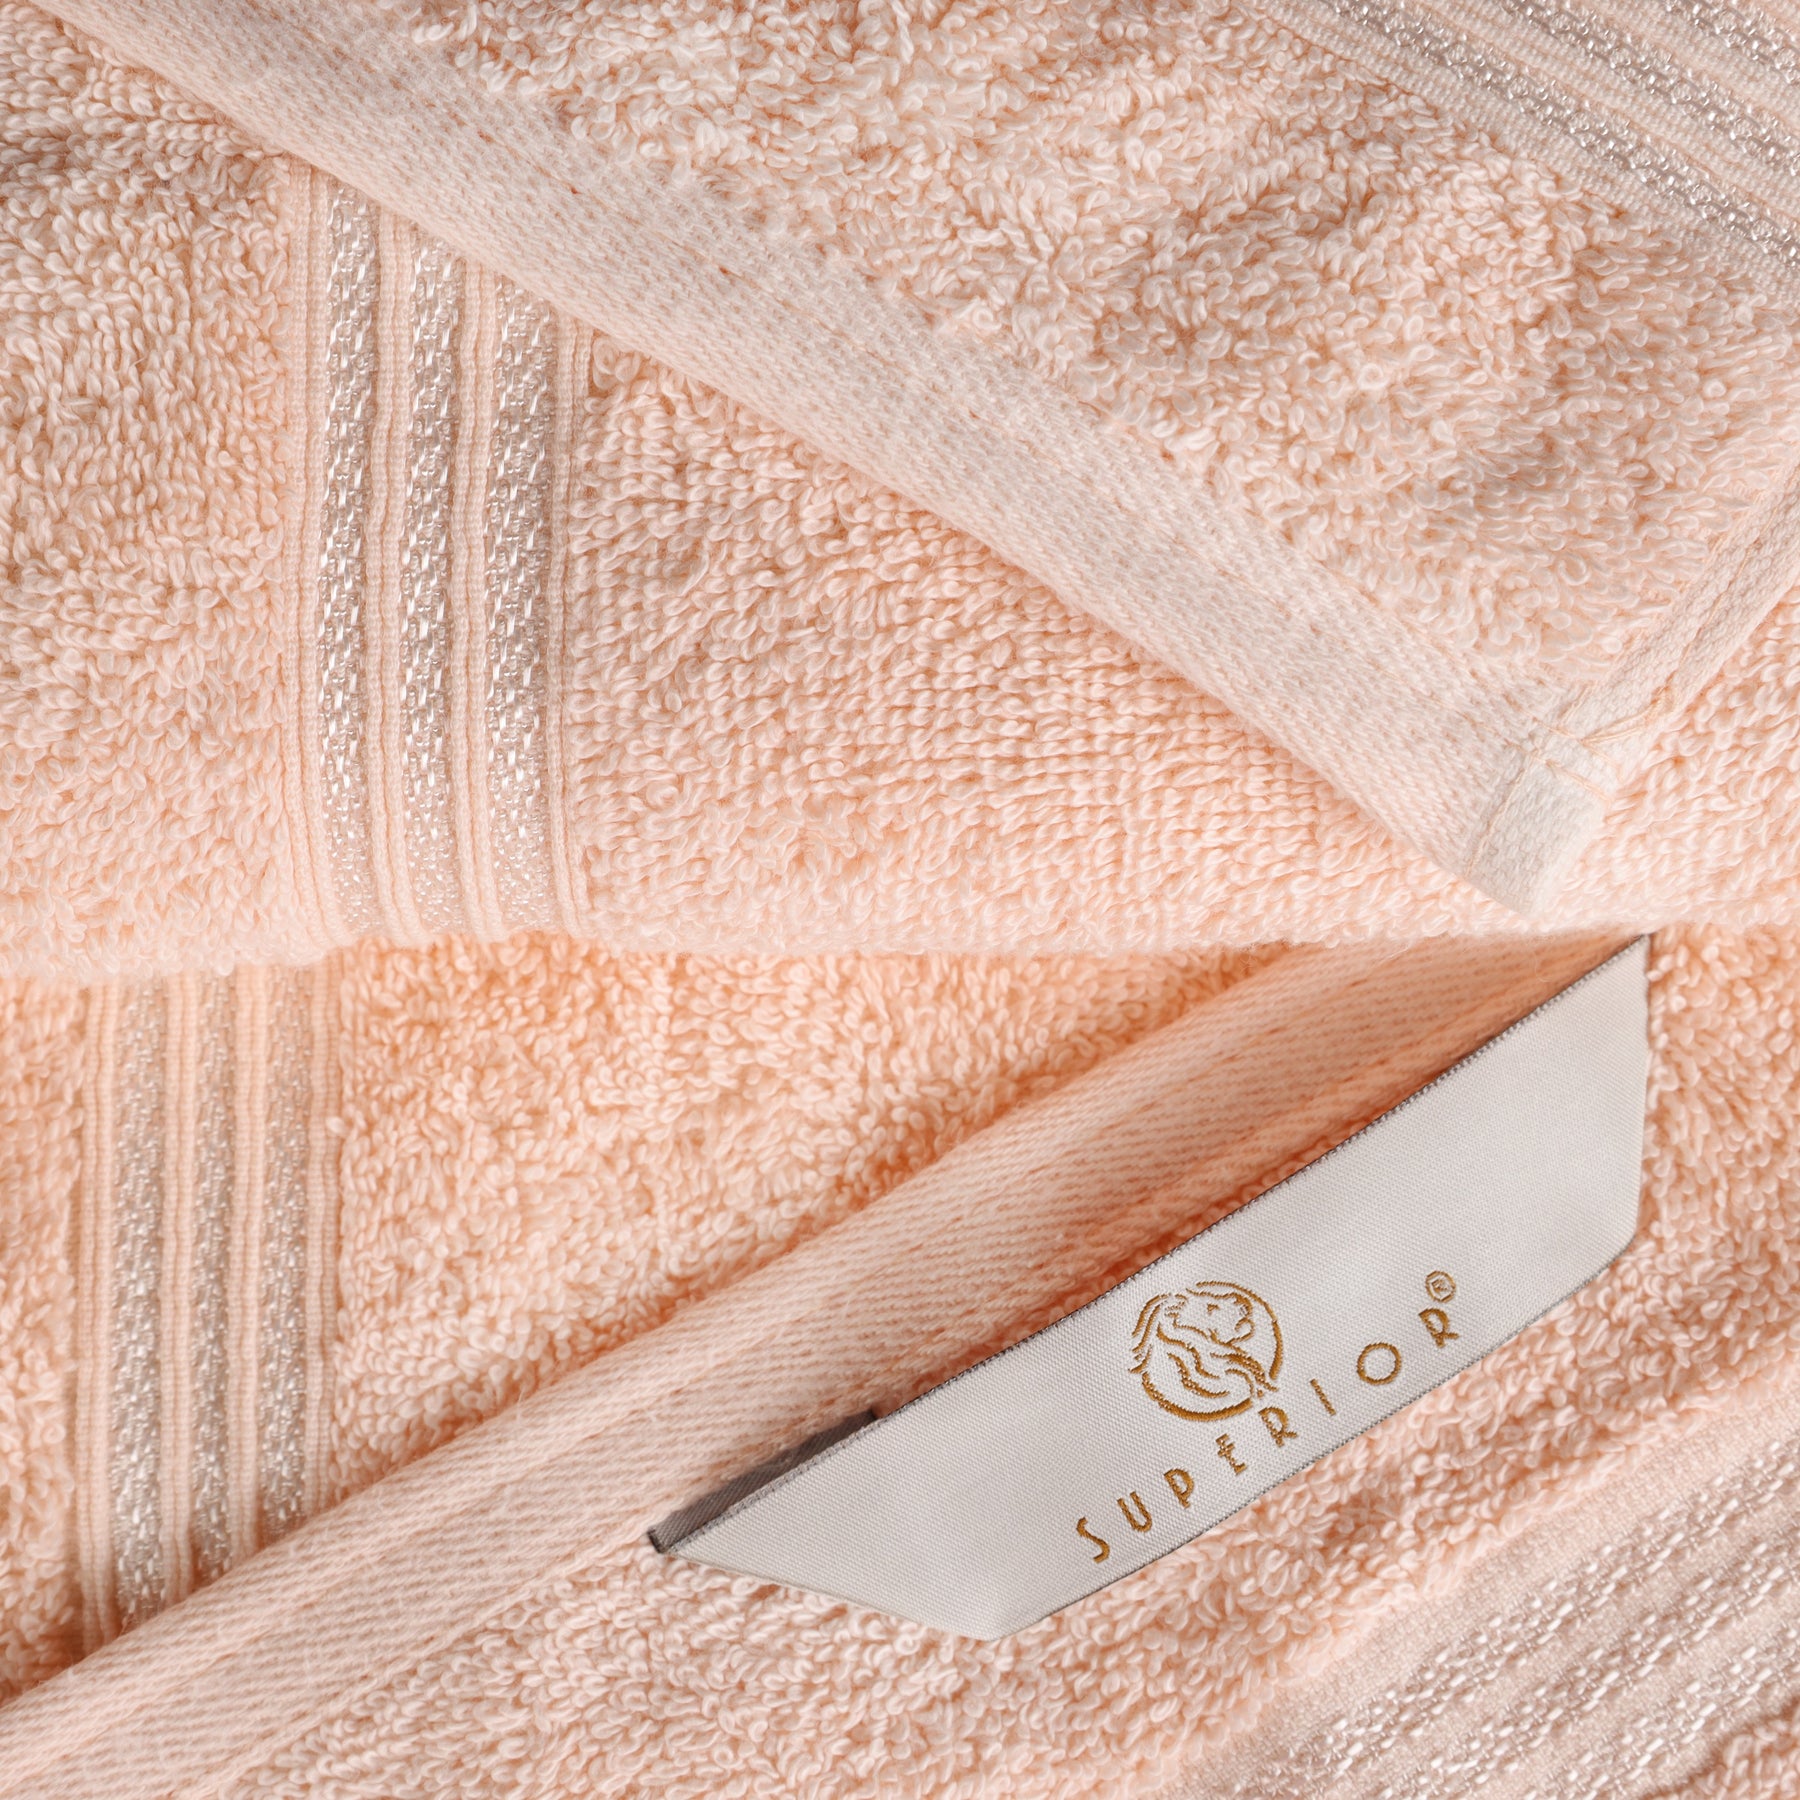 Egyptian Cotton Highly Absorbent Solid 9 Piece Ultra Soft Towel Set - Peach